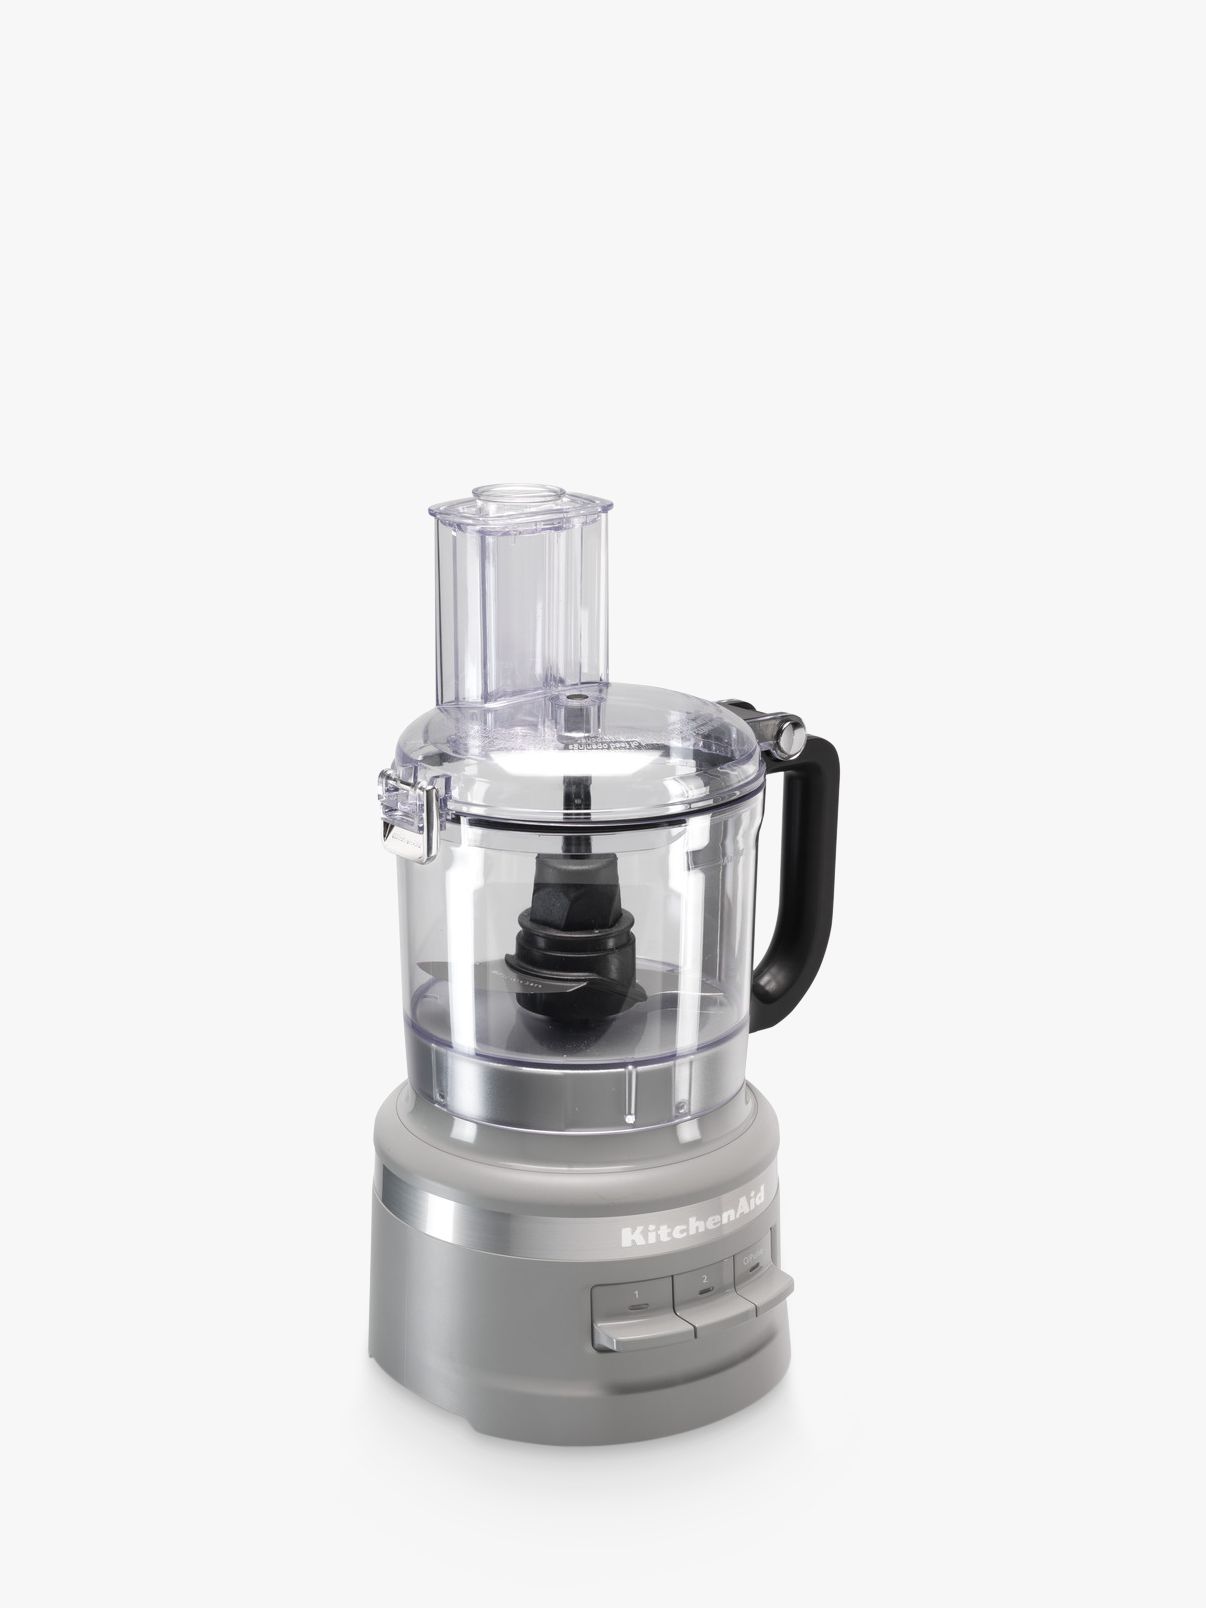 Details about   KitchenAid 5KFP0719EER 1.7 Liter Food Processor 220 Volts Export Only 